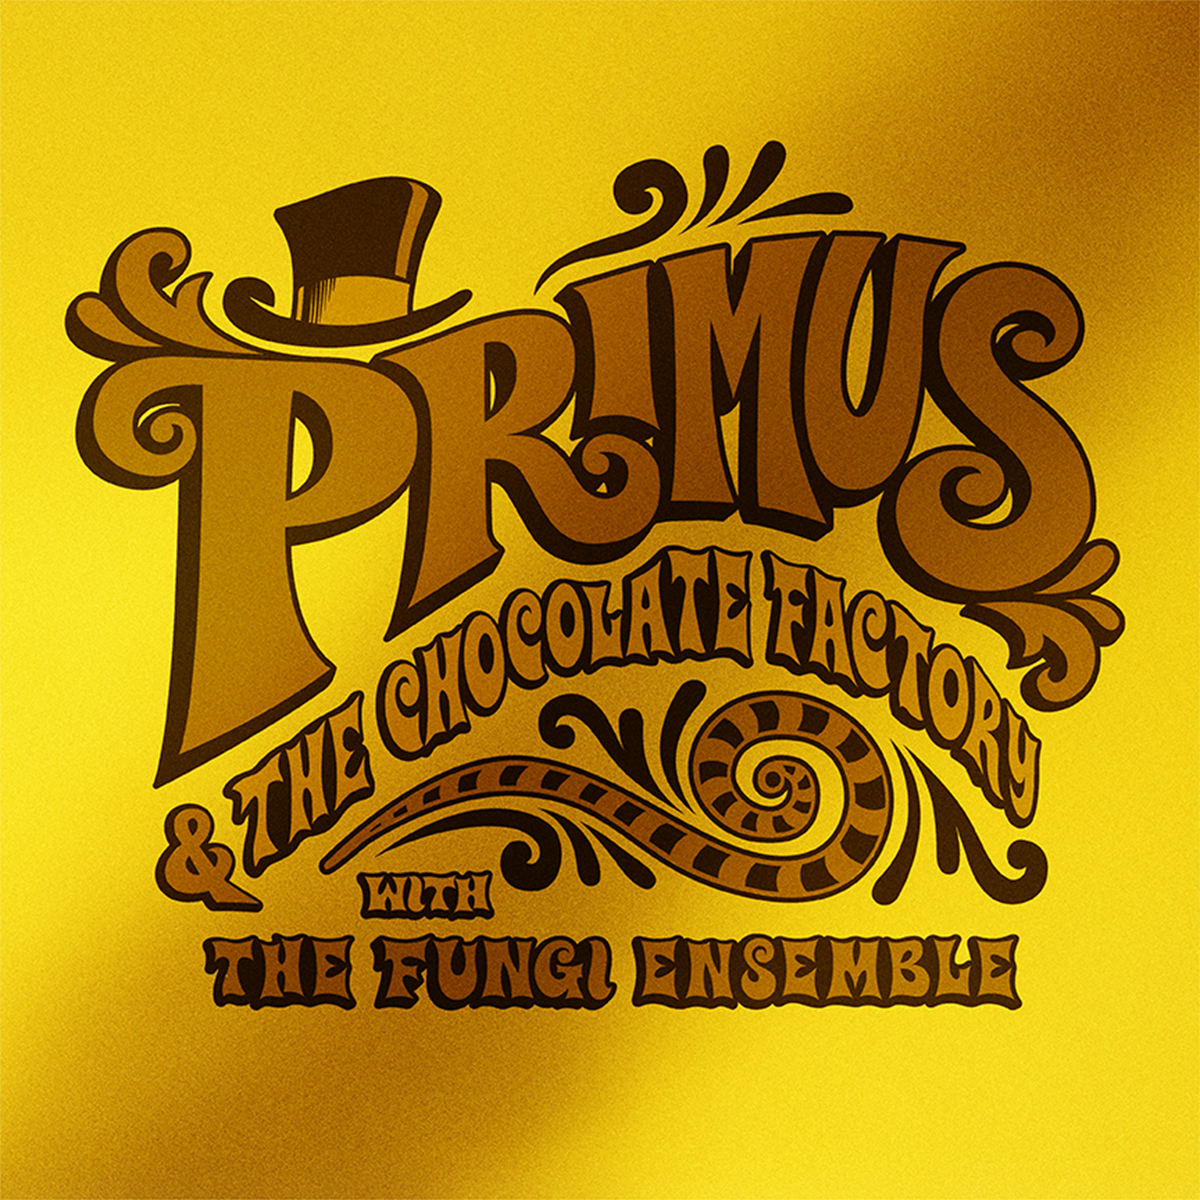 Primus - Primus & The Chocolate Factory with The Fungi Ensemble (Golden Wrapper Edition)